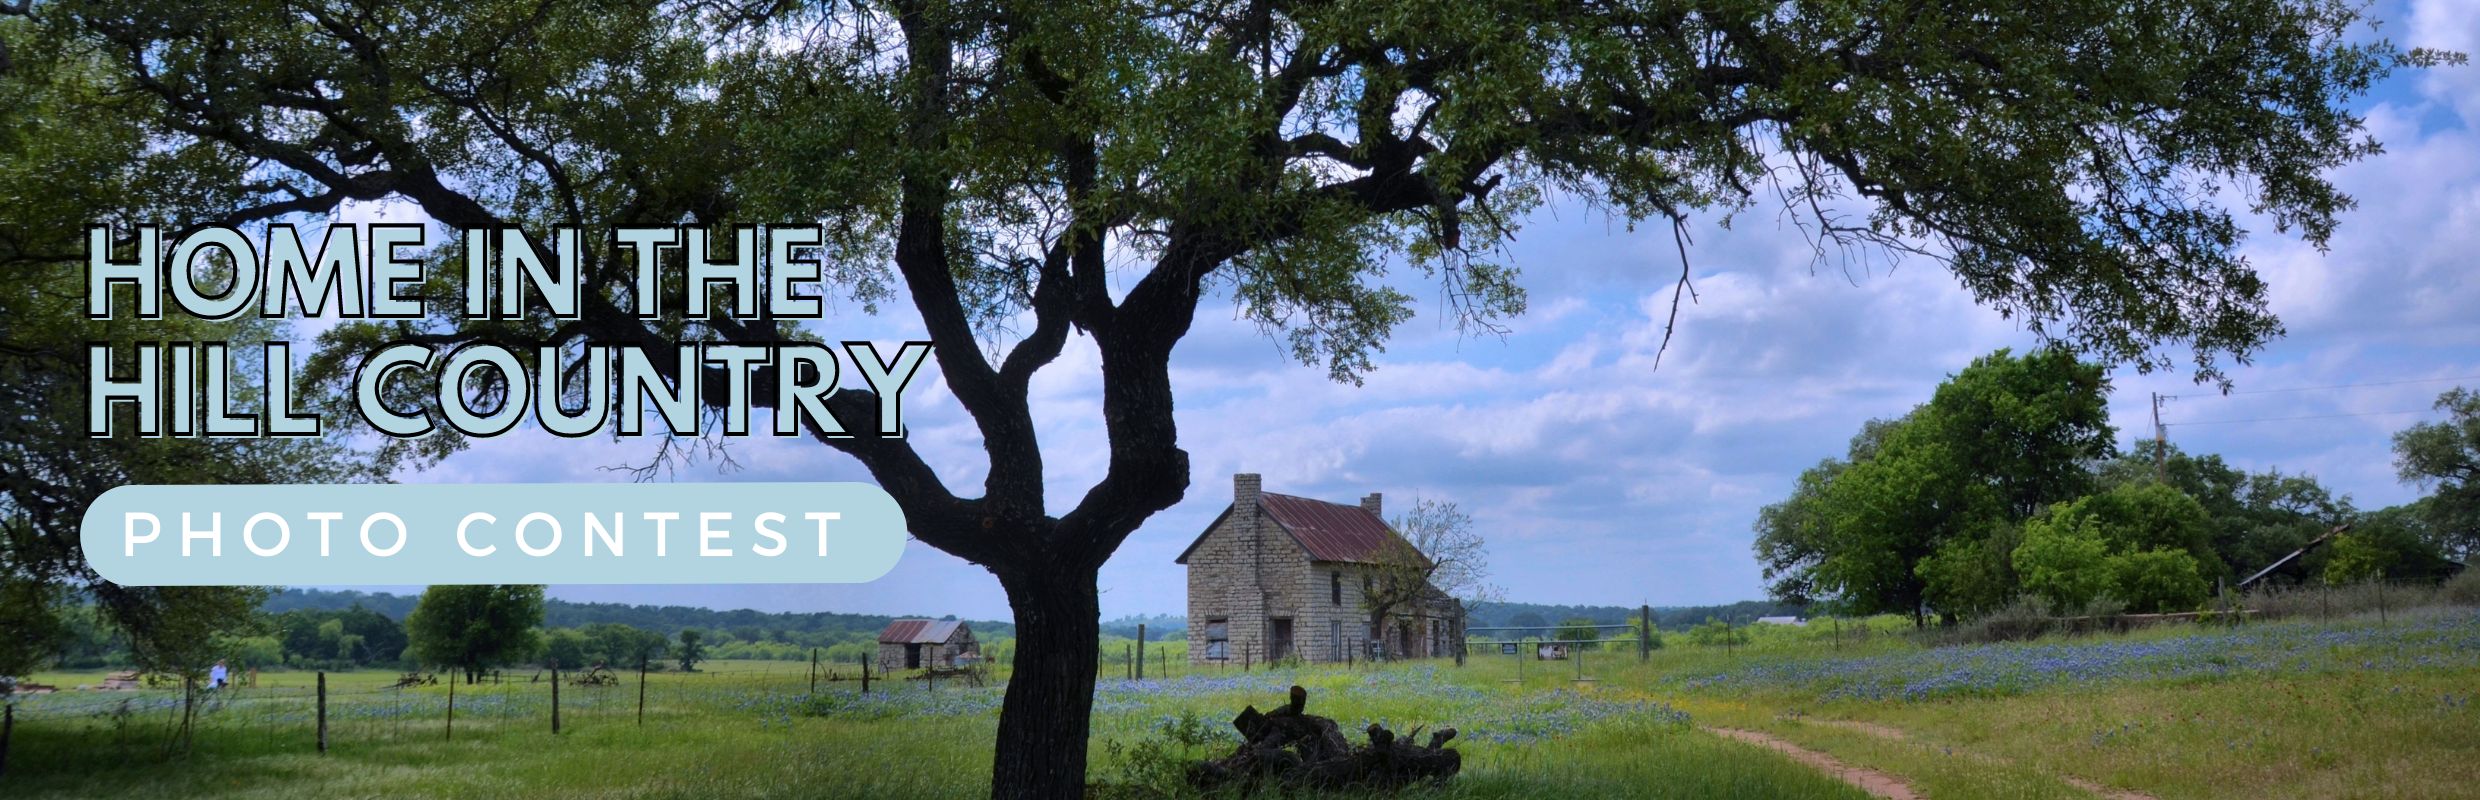 An oak tree stretches over blue skies and a small house in the middle of a field